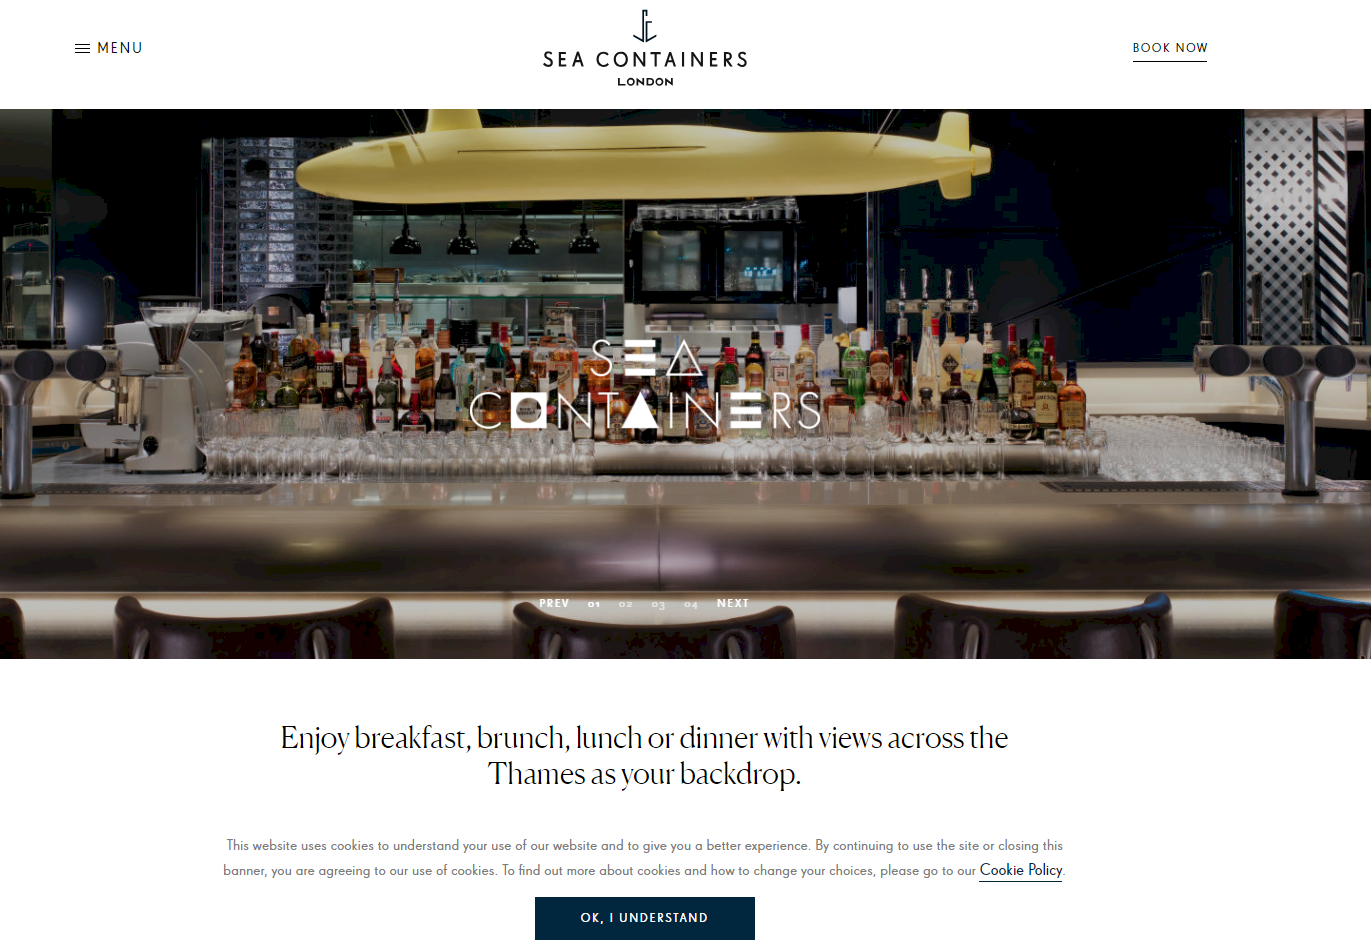 Screenshot of Sea Containers London's website